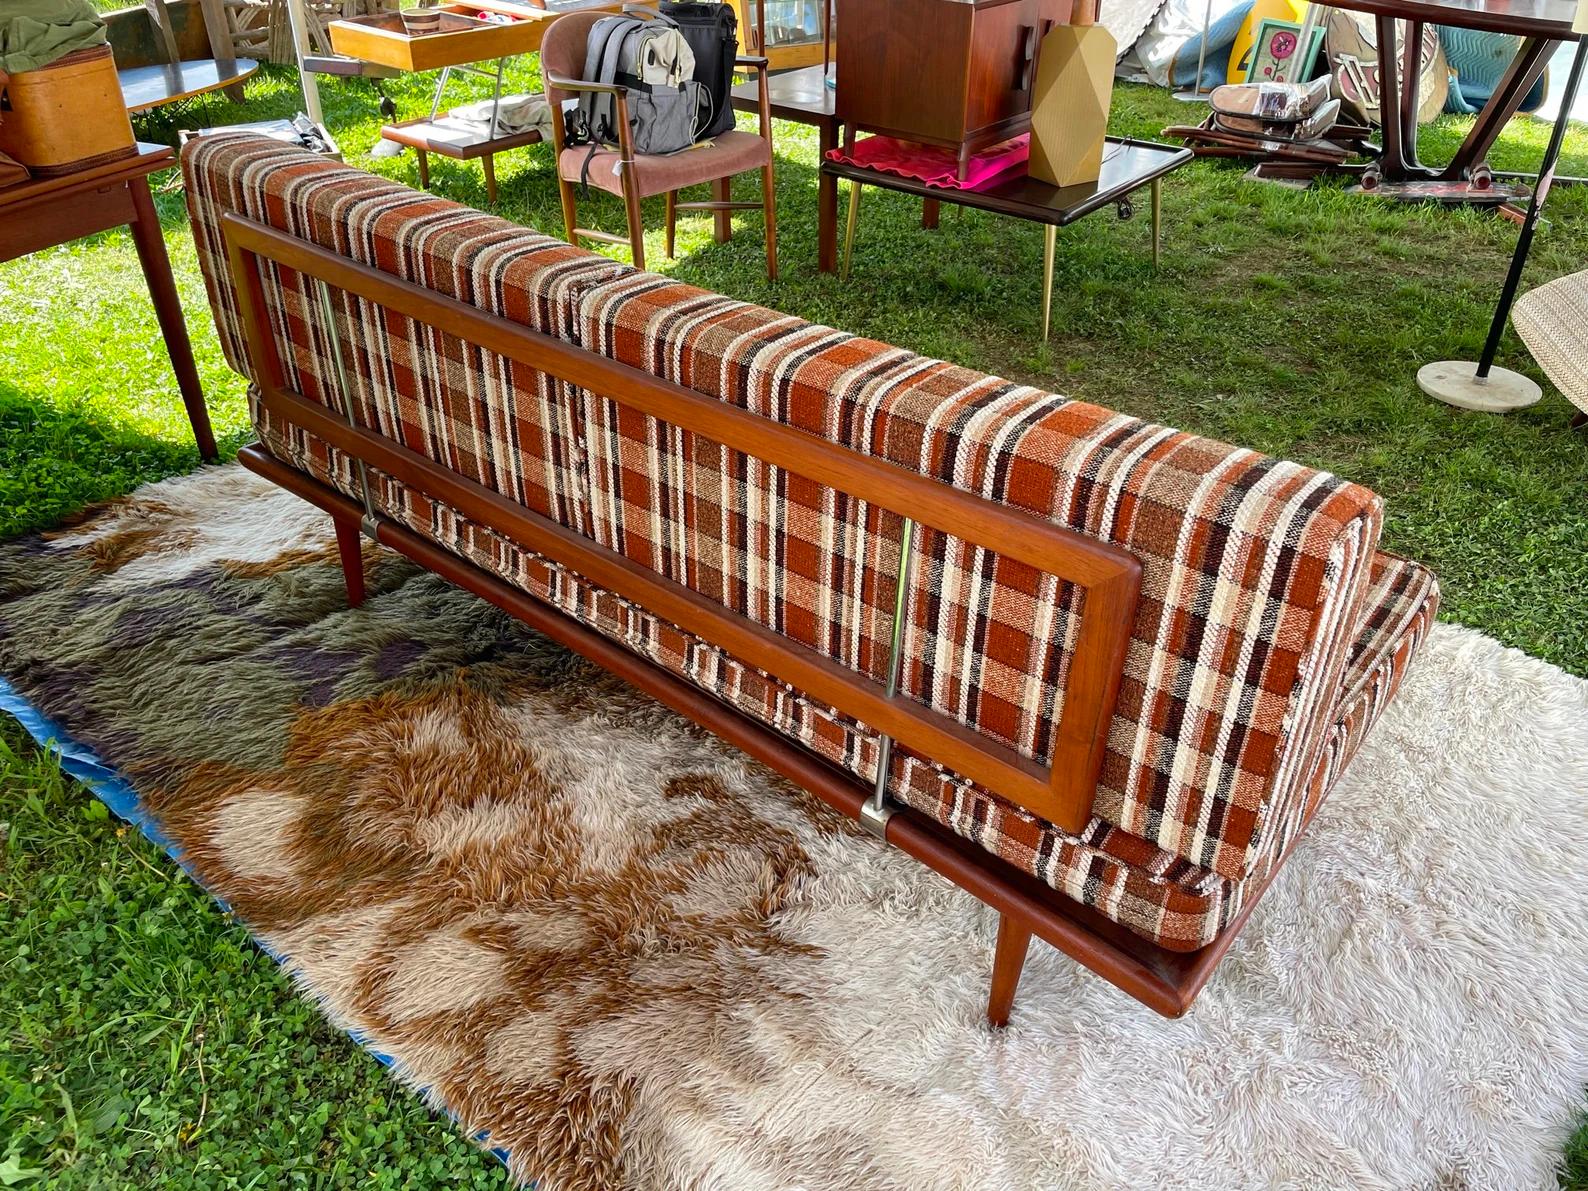 W 75 x D 30 x H 31 / Seat H 17 in. (Approx. 75 lbs.)

A solid teak, heavy, top of the line, and comfortable Danish made and designed Daybed.  The foam in the upholstery is very supportive, not soft, it is dense. The frame joinery is tight, all edges